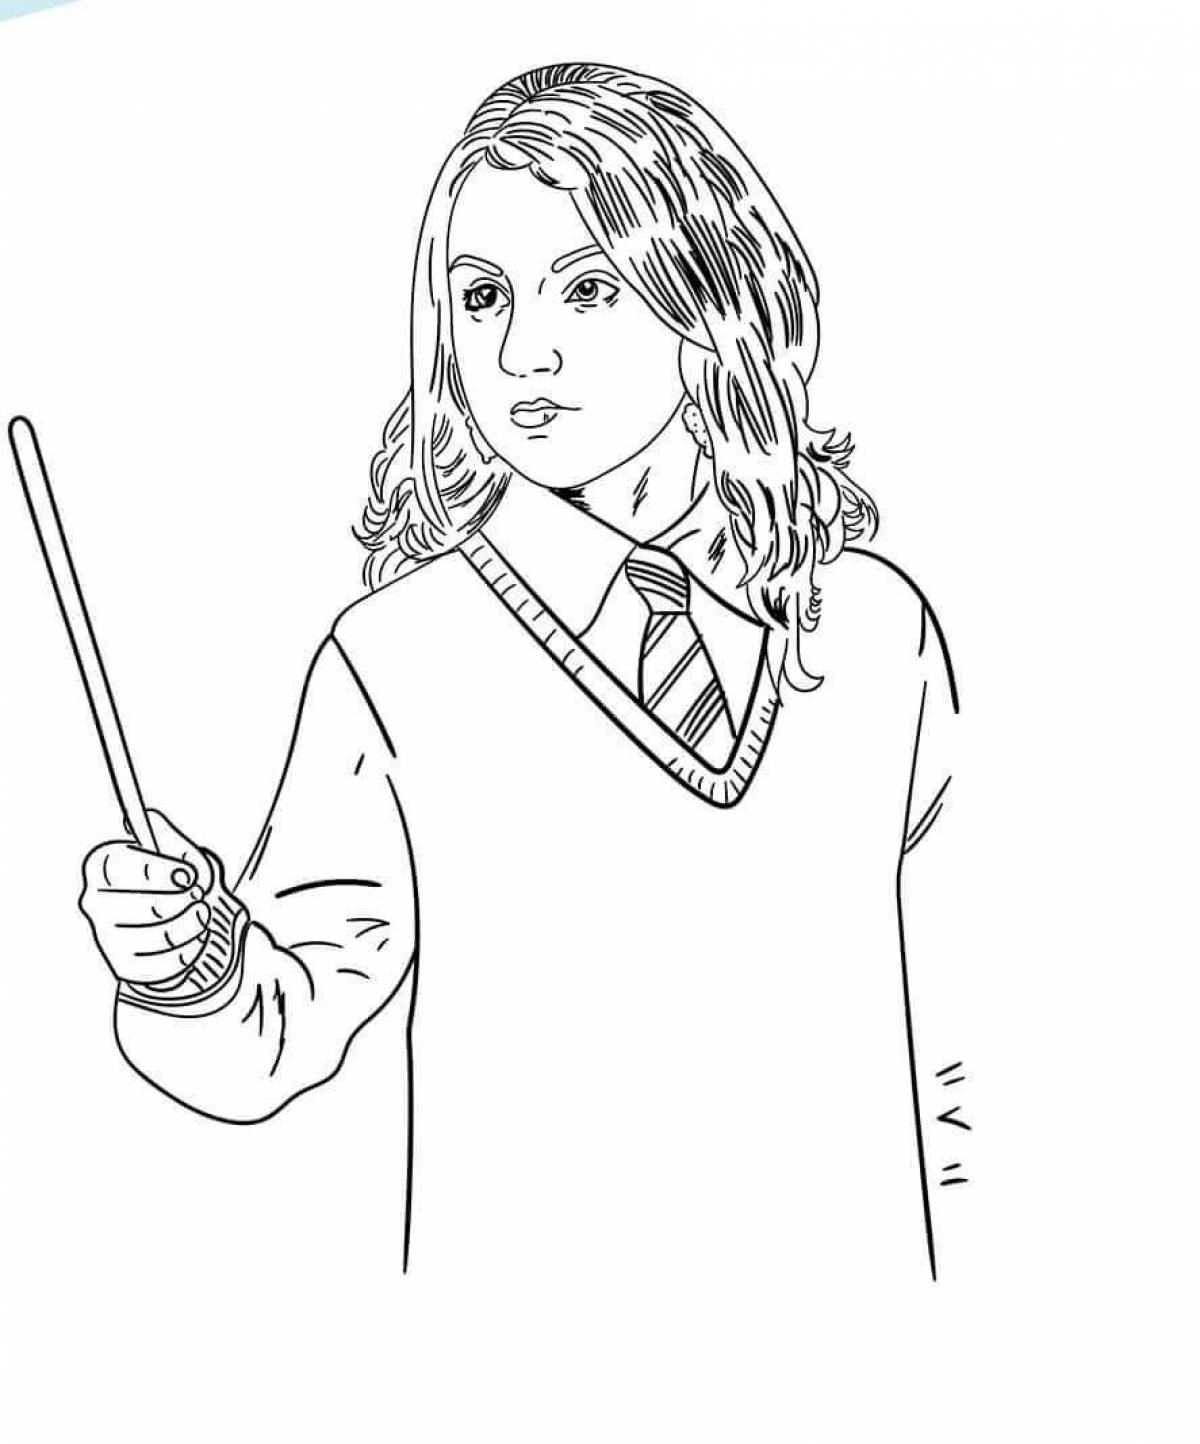 Playful harry potter spiral coloring page